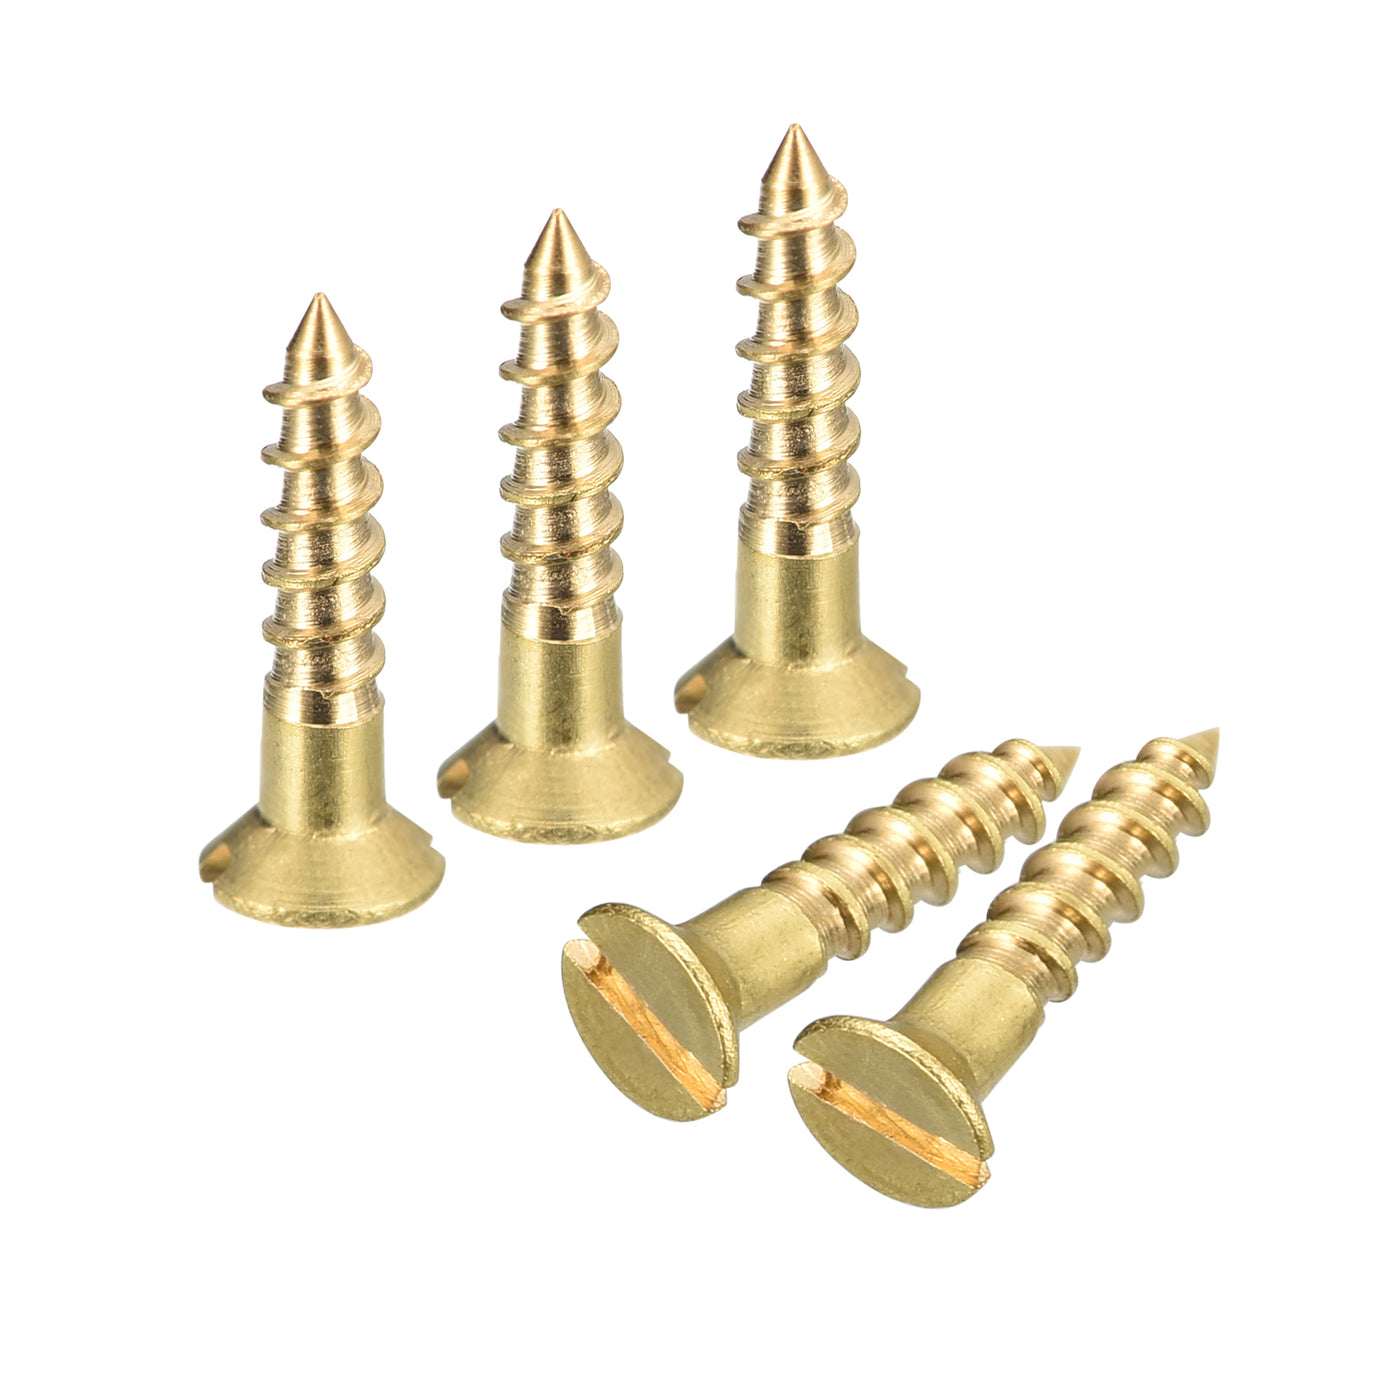 uxcell Uxcell 50Pcs M2.5 x 12mm Brass Slotted Drive Flat Head Wood Screws Self Tapping Screw